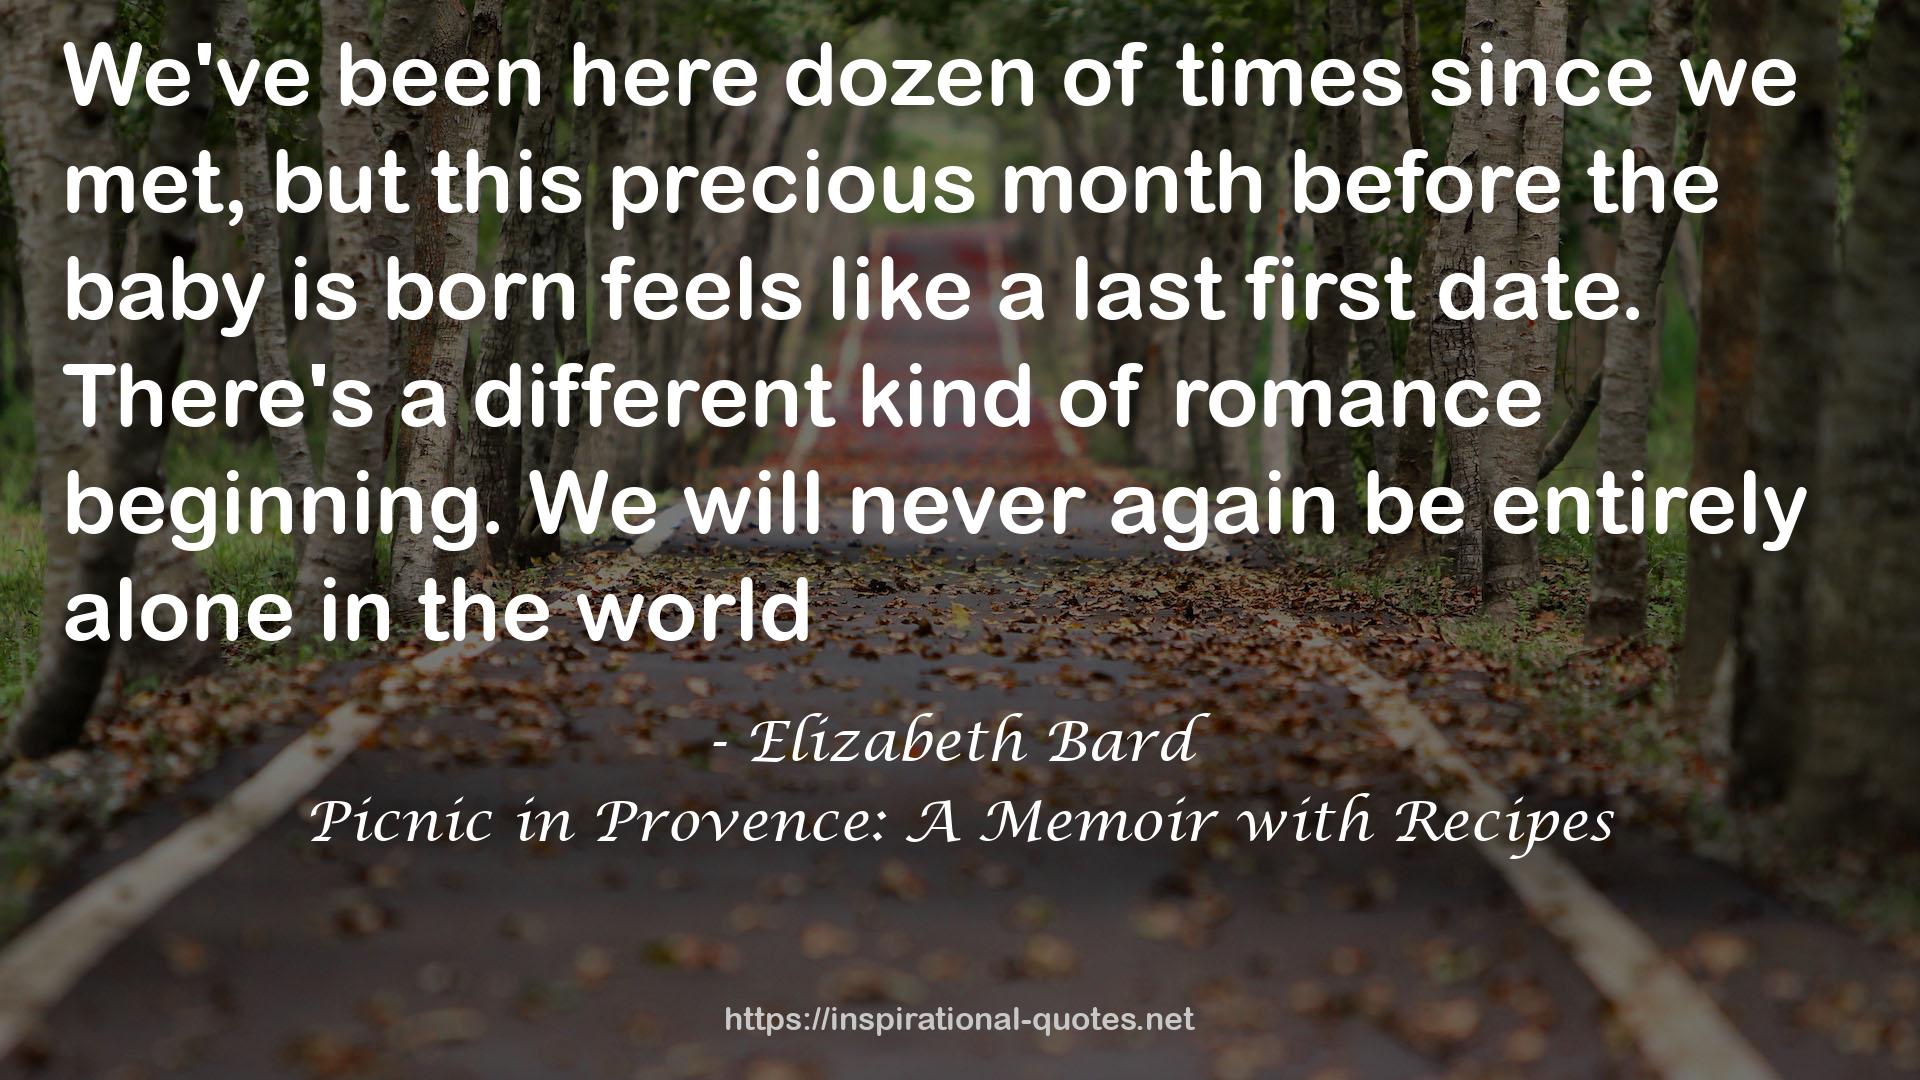 Picnic in Provence: A Memoir with Recipes QUOTES